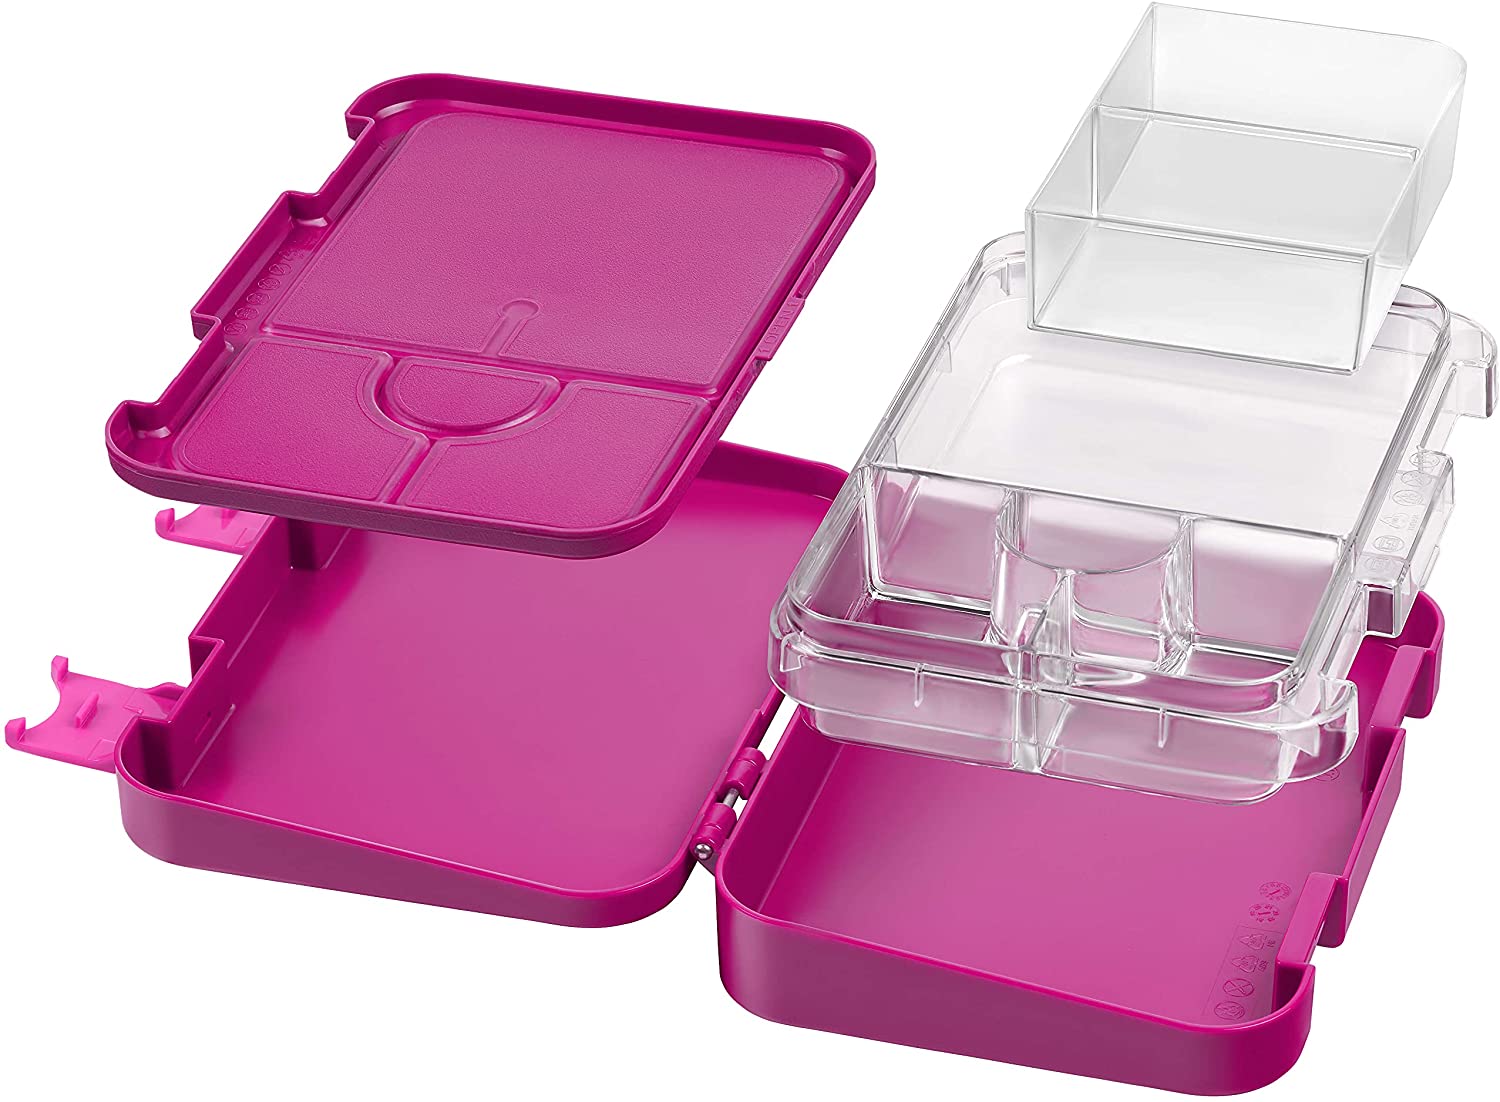 Snack Attack Bento Box or Lunch Box for Kids 4 & 6 Convertible Compartments  | Portion Lunch Box | Food Graded Materials BPA FREE & LEAK PROOF | Made